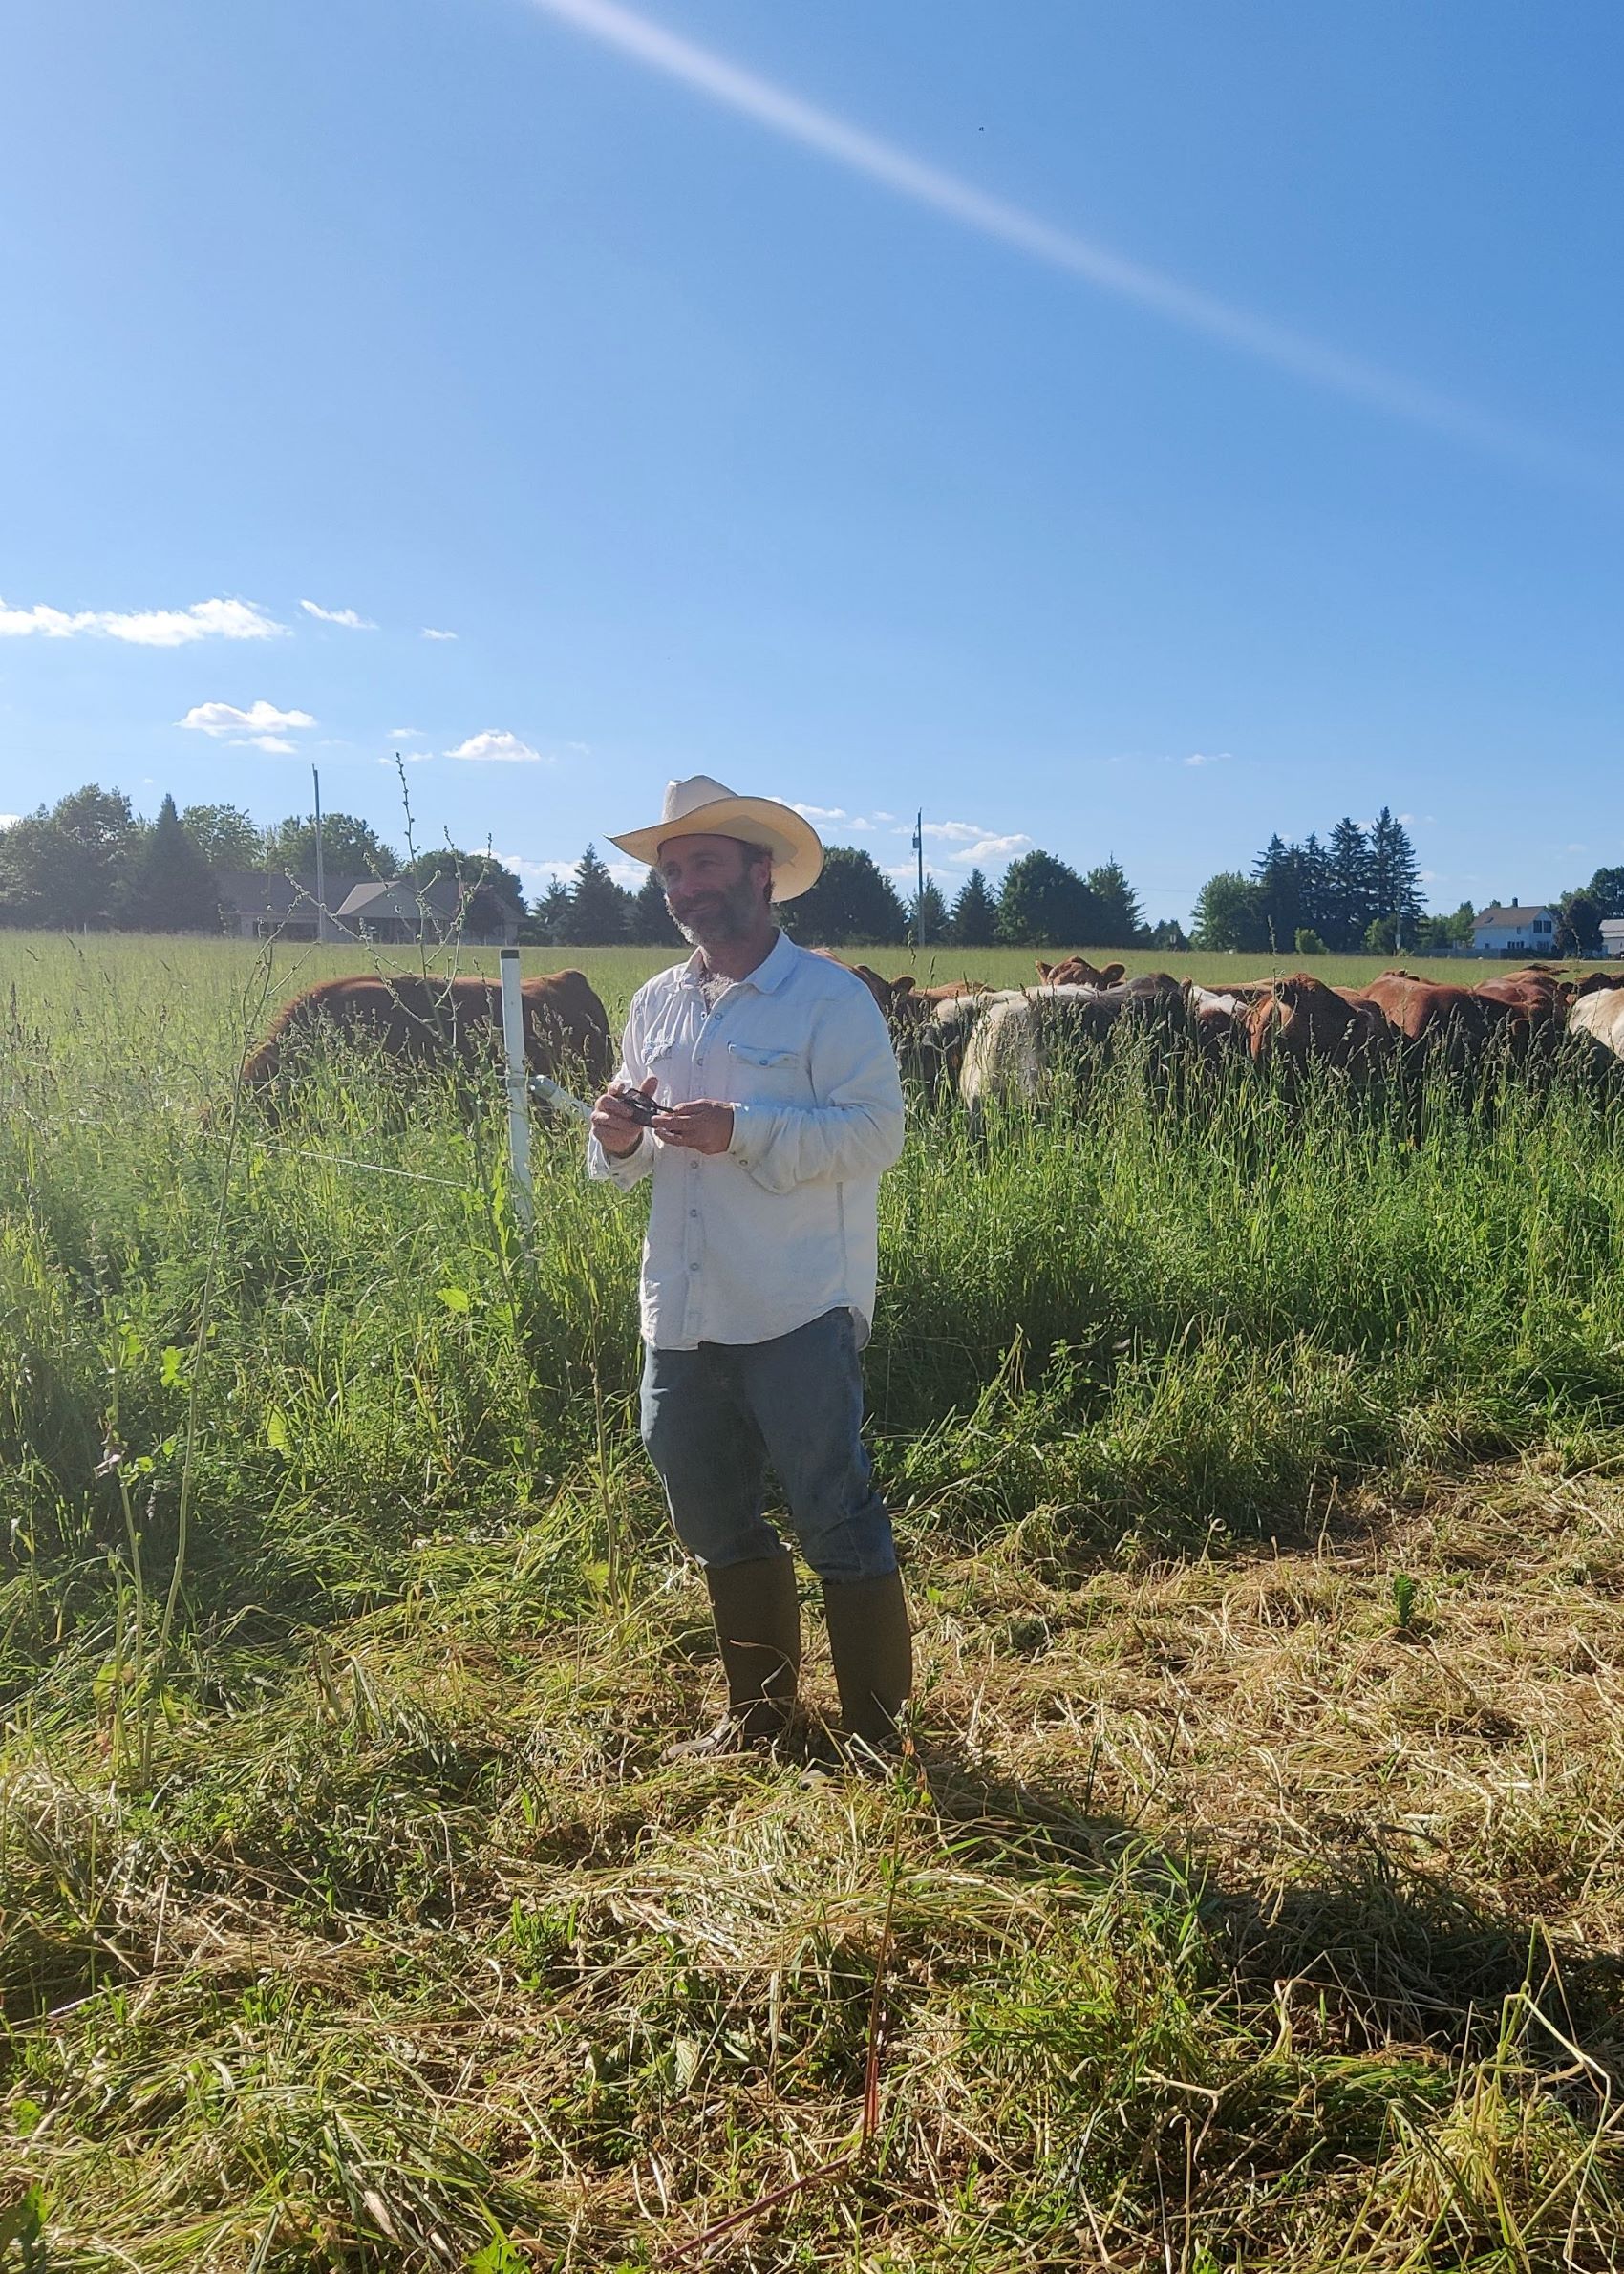 Joe Mantoan, a middle age white man wearing a cowboy hat, stands and smiles with his brown cows in the background on a sunny day